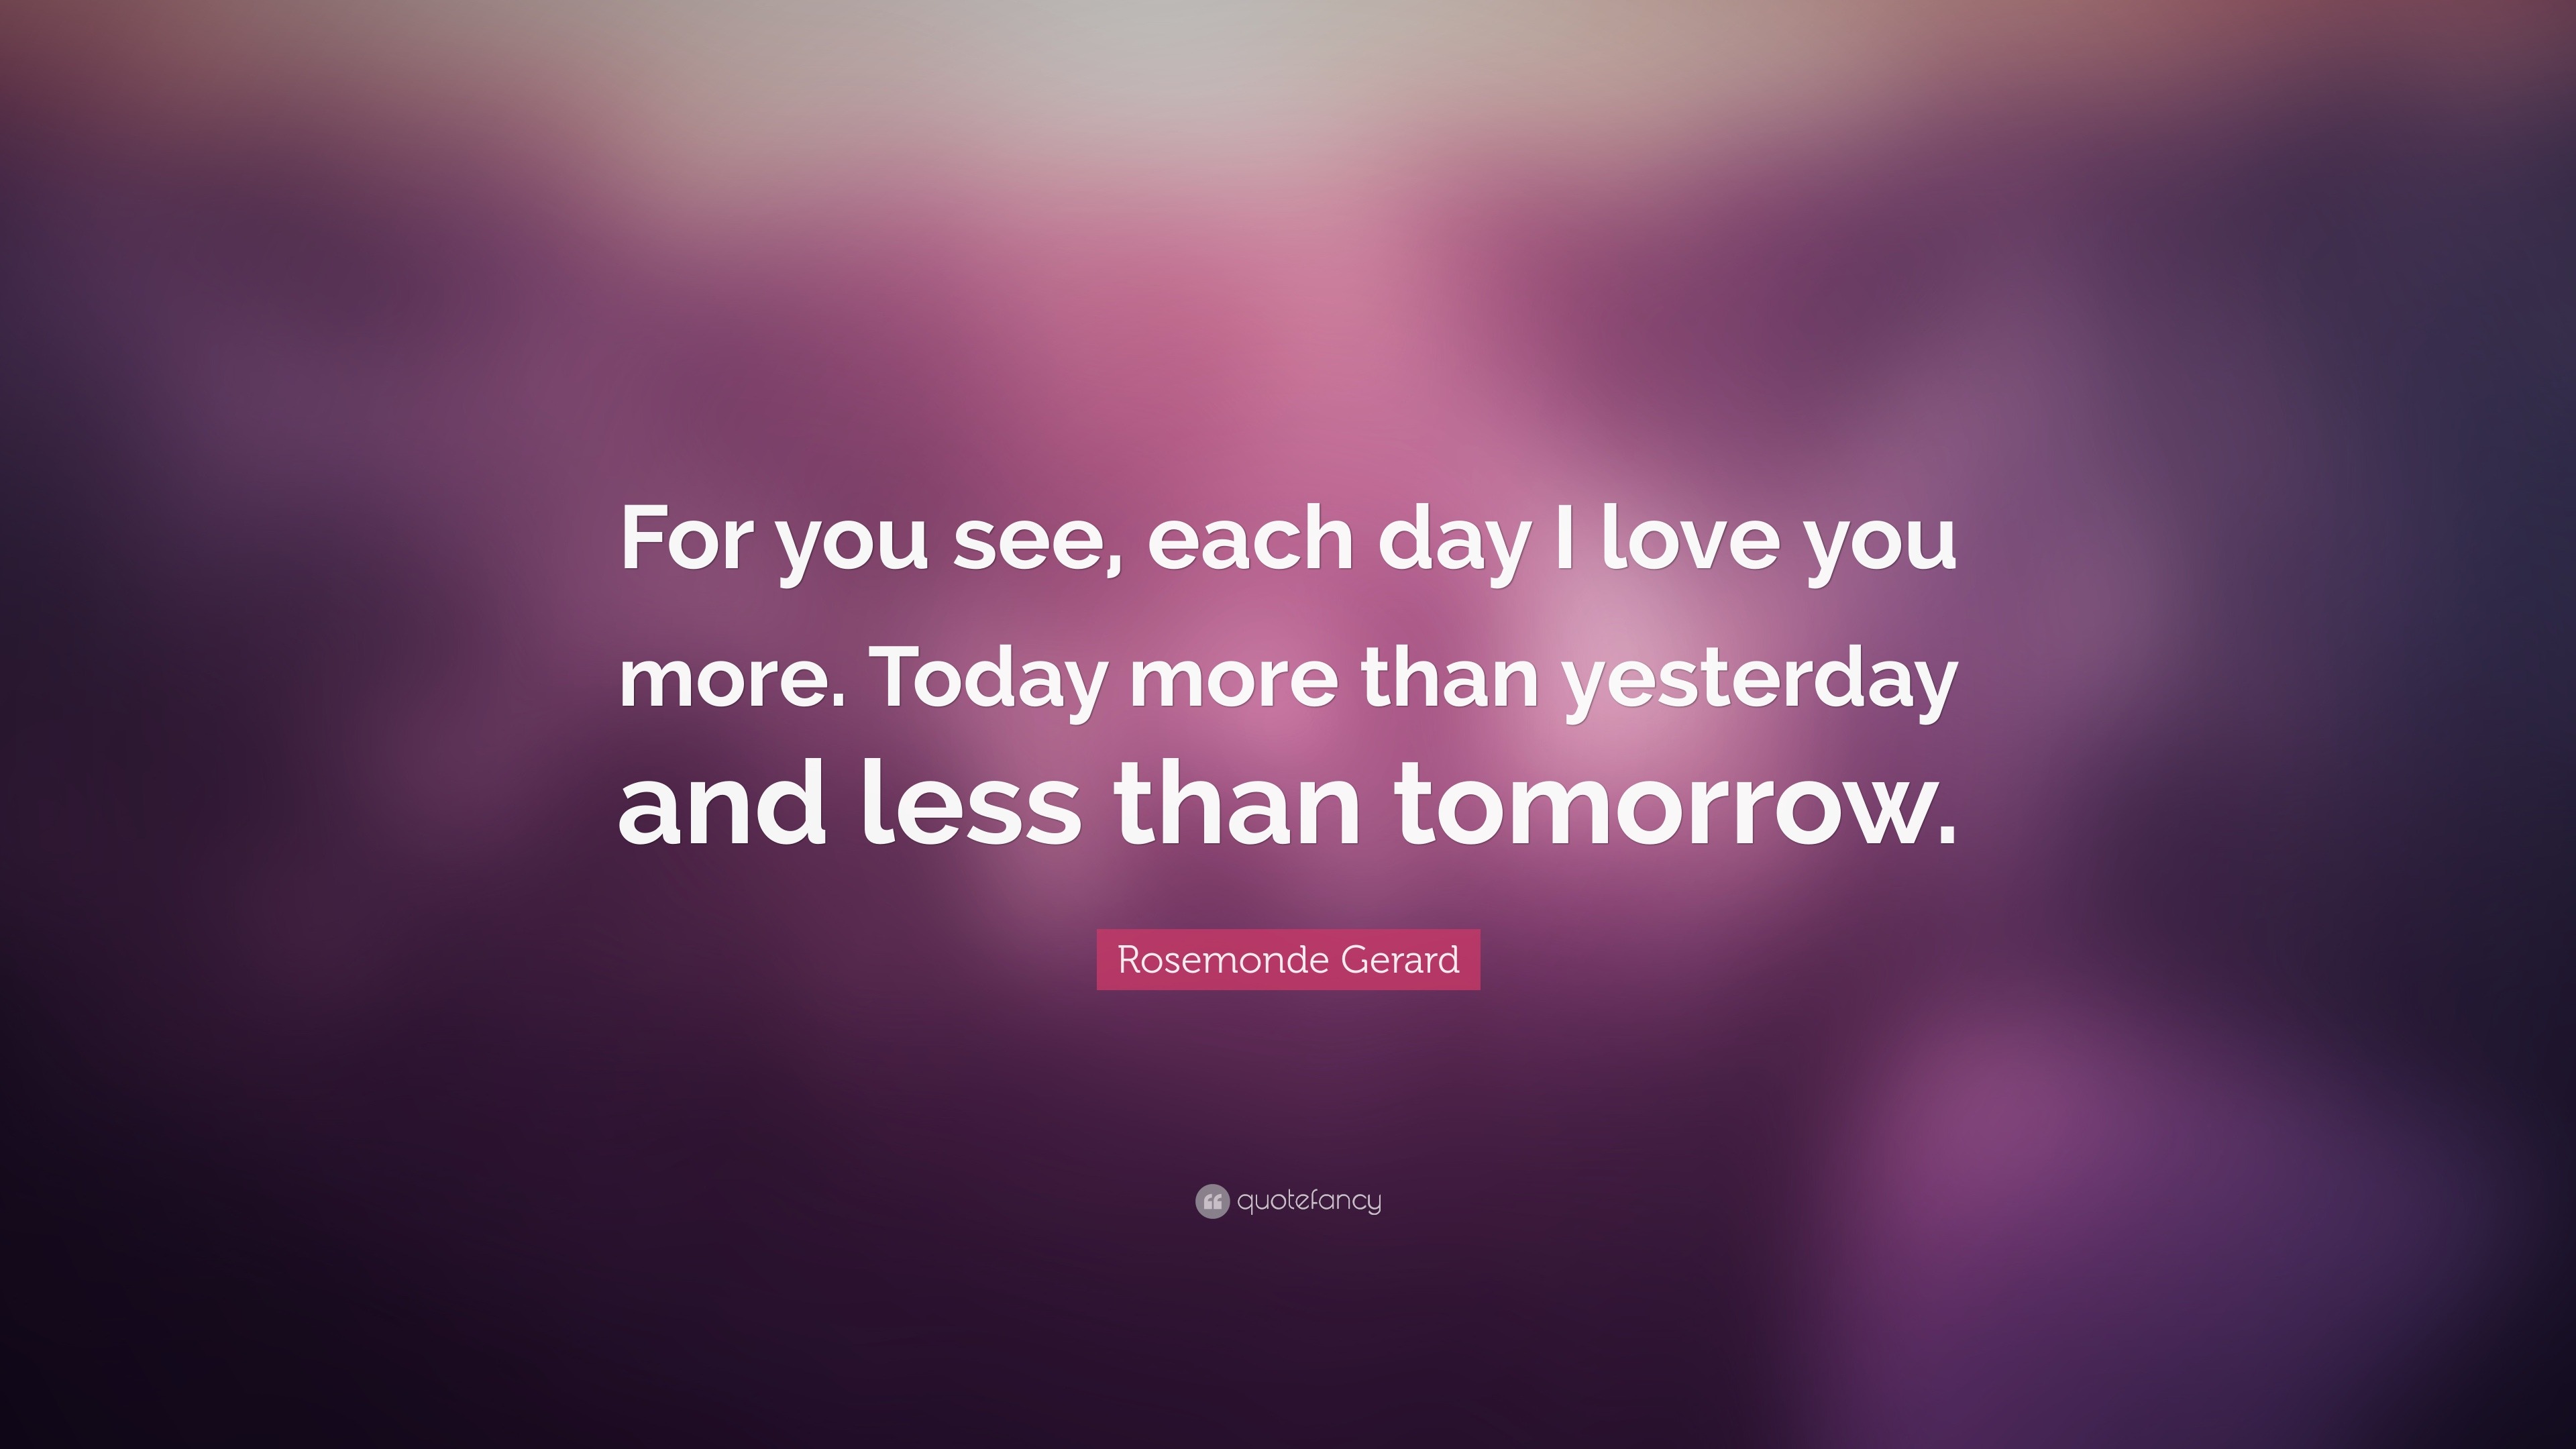 i love you more today than yesterday